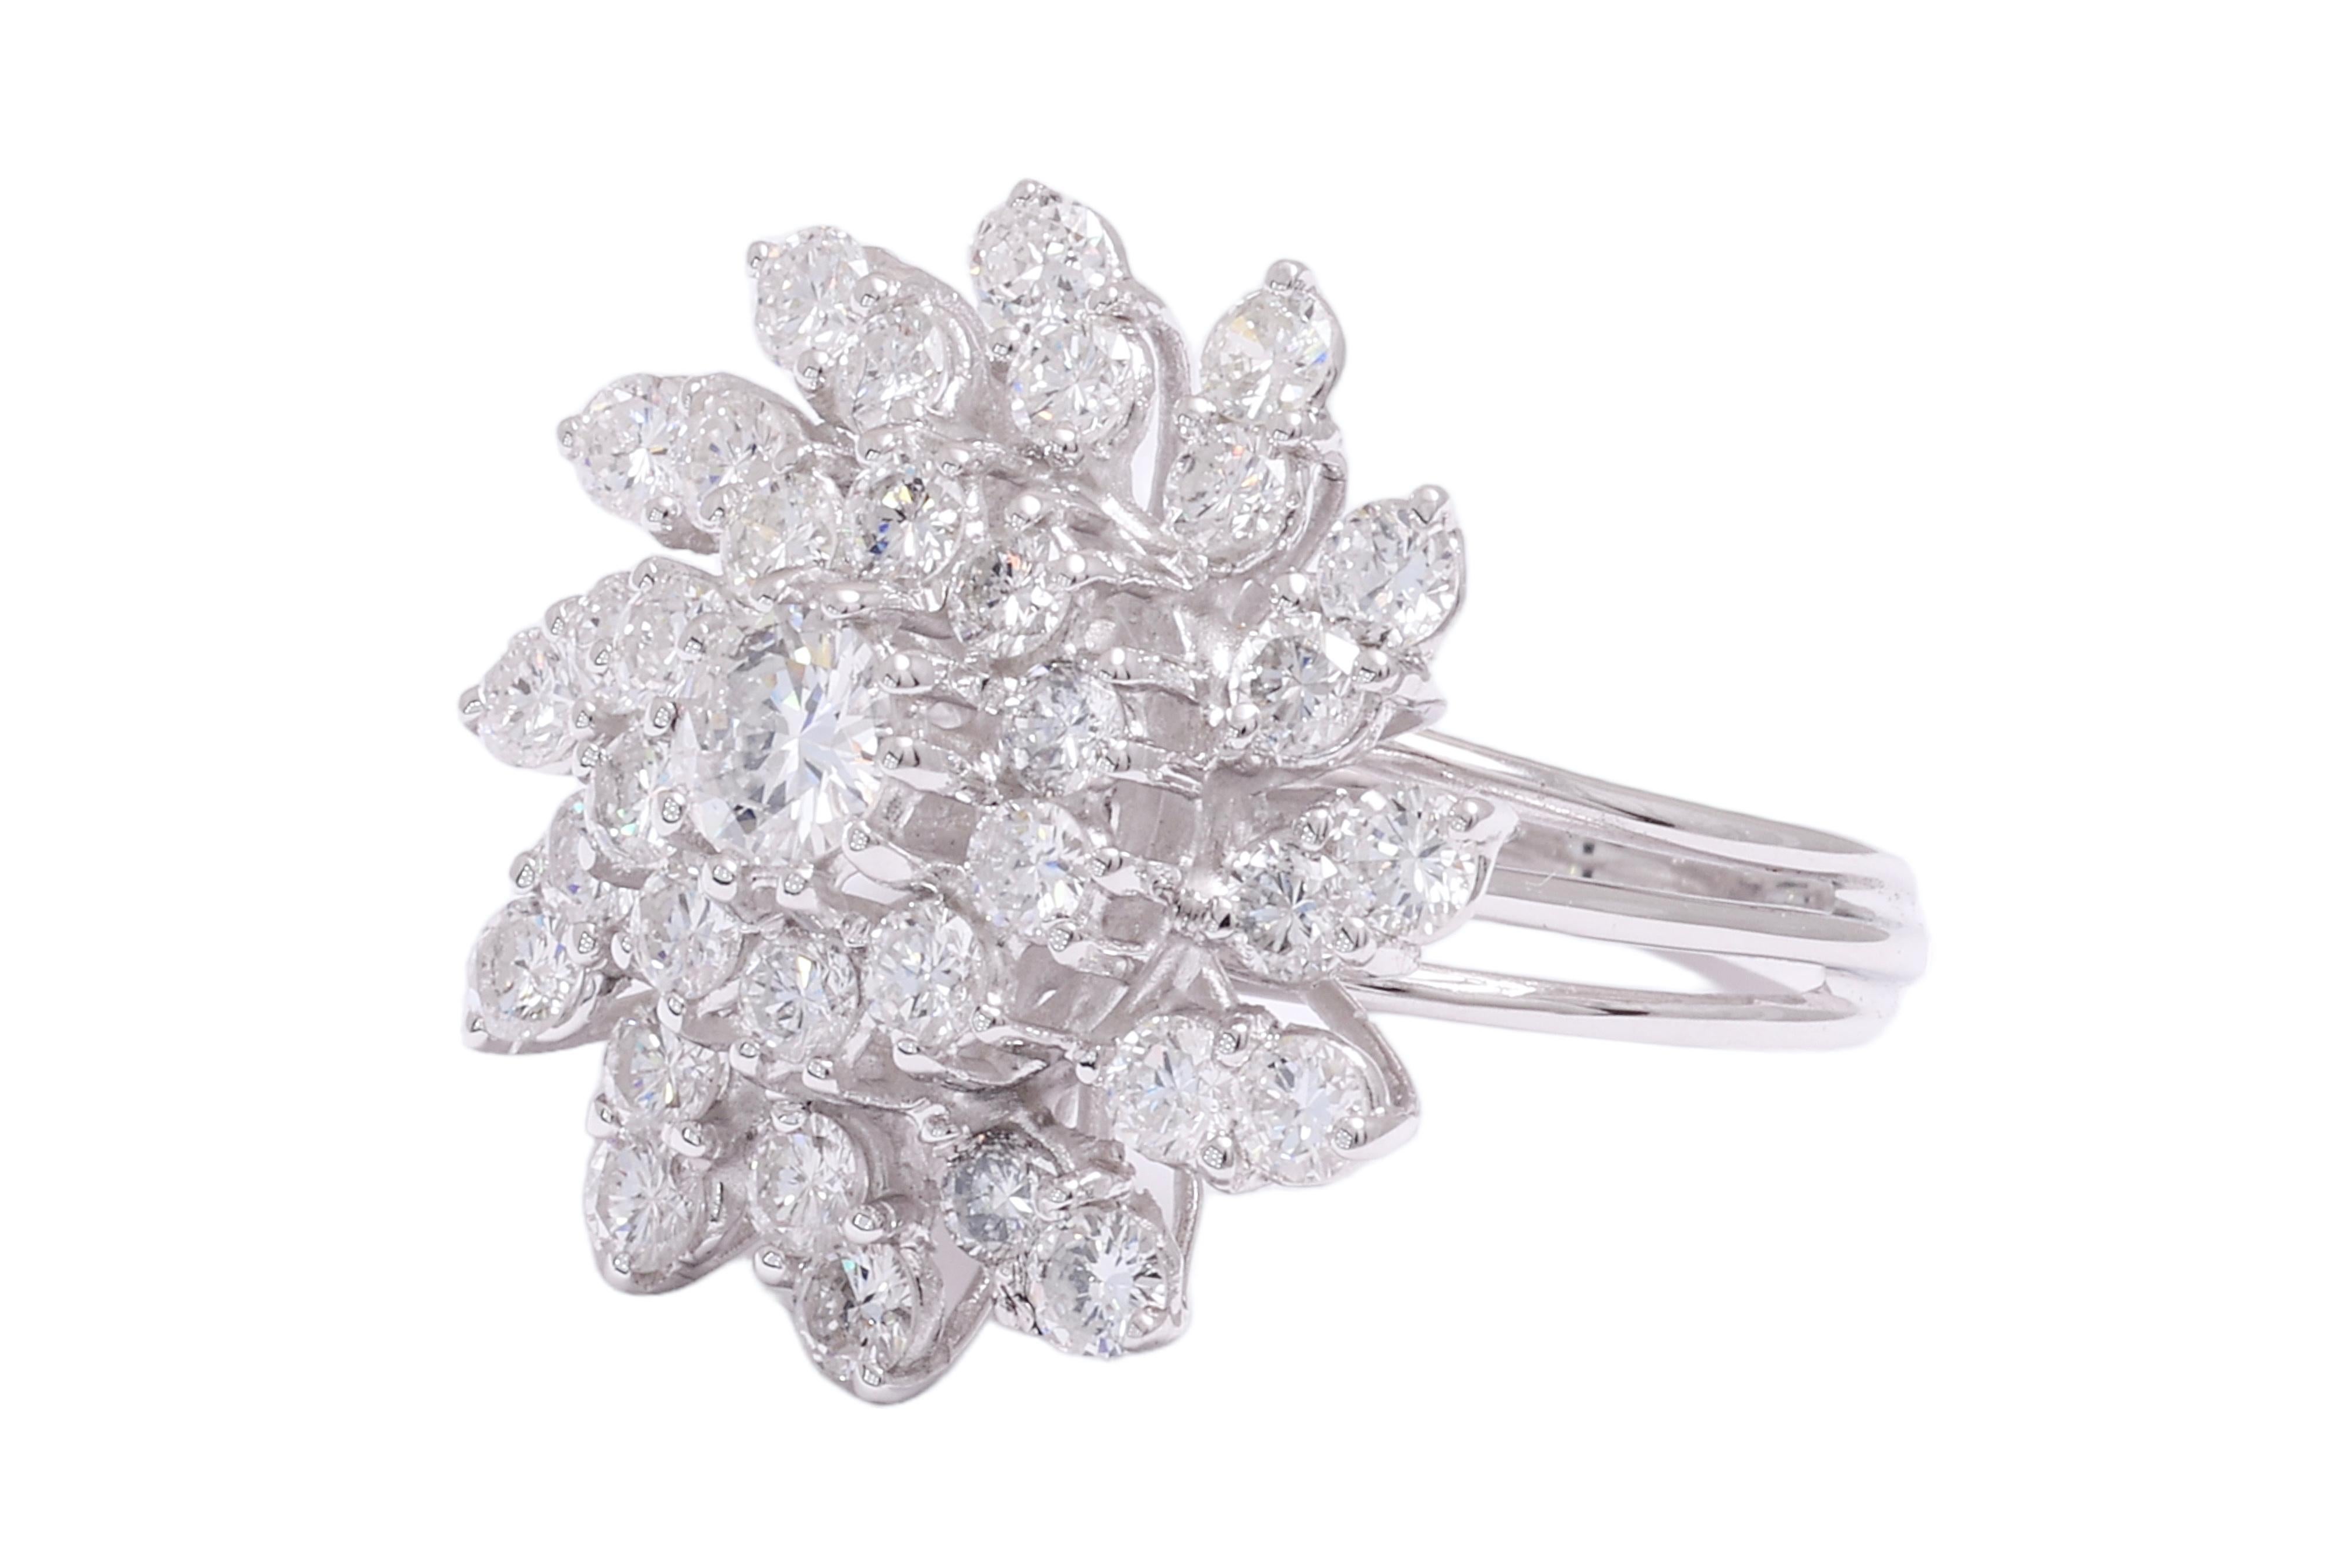 18 kt. White Gold Flower Ring  With 2.85 ct. Diamonds  In Excellent Condition For Sale In Antwerp, BE